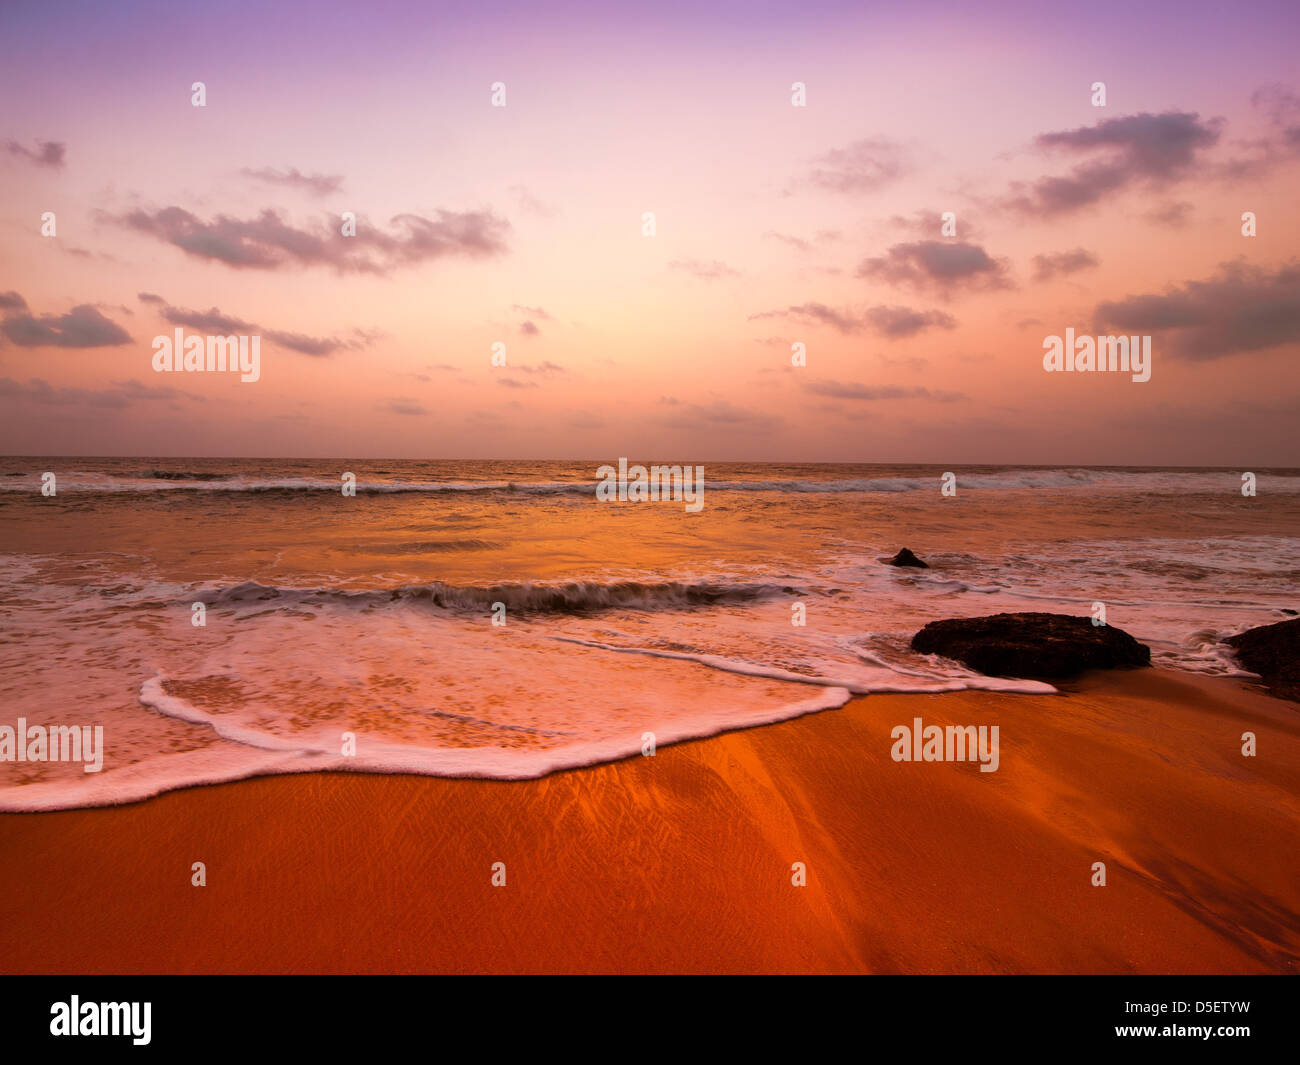 Sunset at tropical beach landscape. Rocks at the ocean coast under evening sun. South India Stock Photo